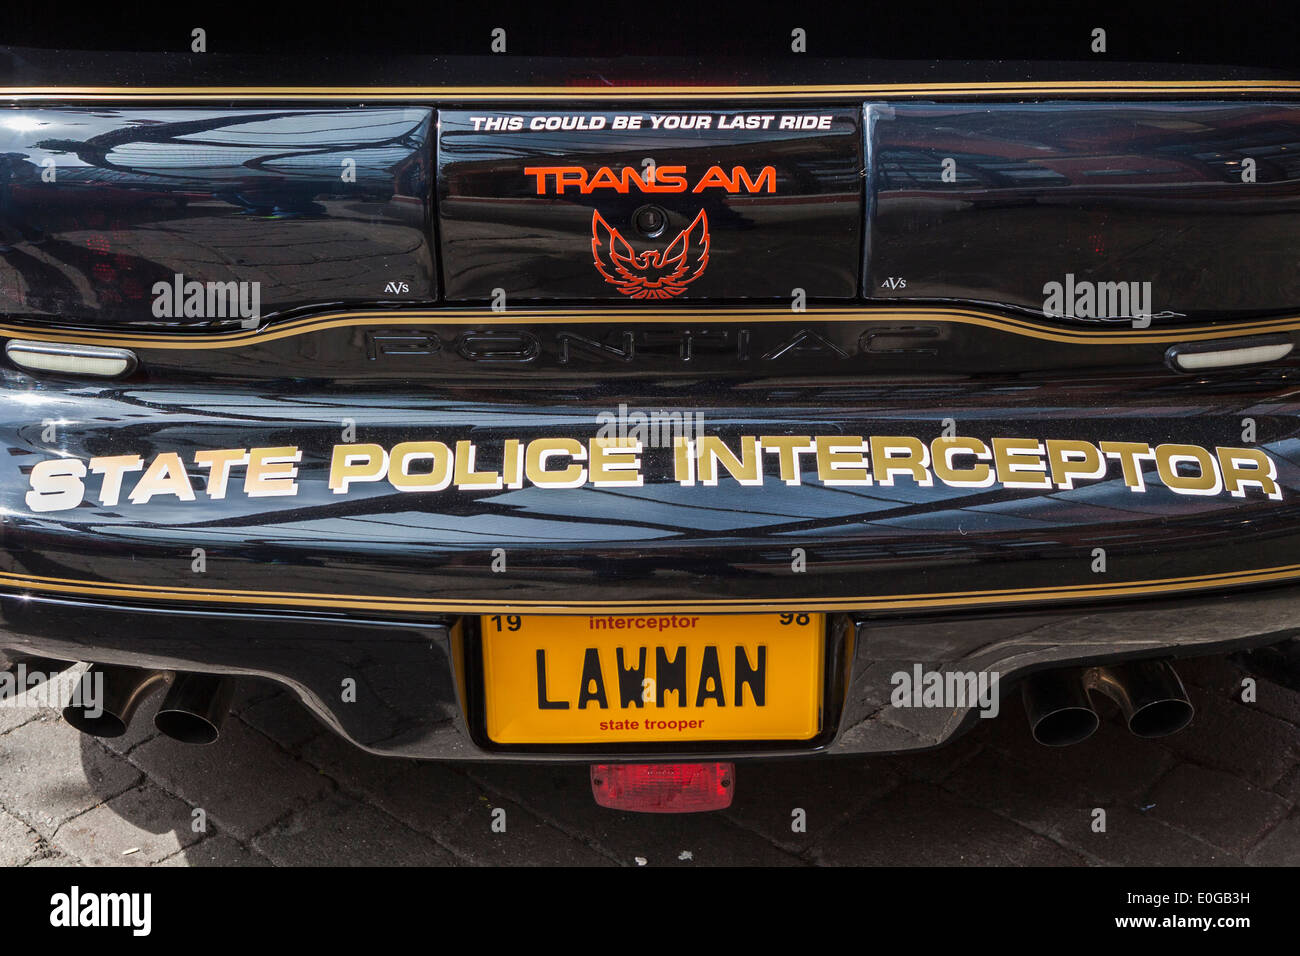 Classic car detail, Trans A, 'State Police Interceptor' with Lawman Number plate Stock Photo